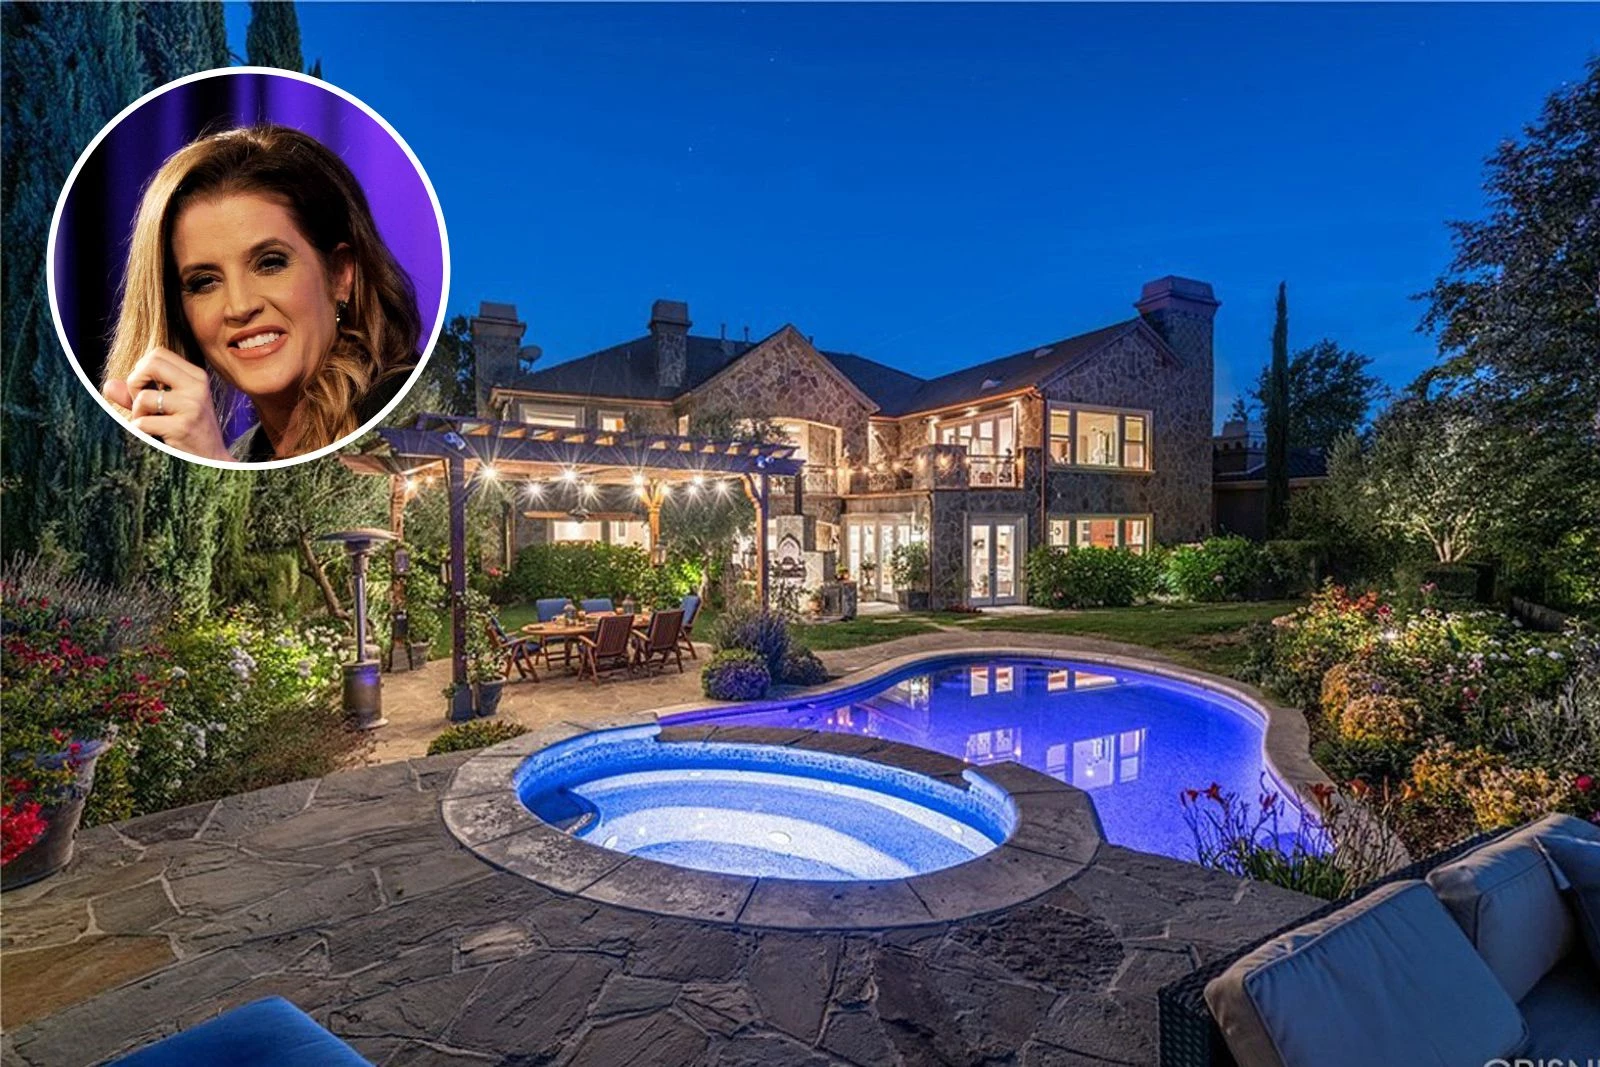 Lisa Marie Presley's California Mansion Is Spectacular [Pictures]